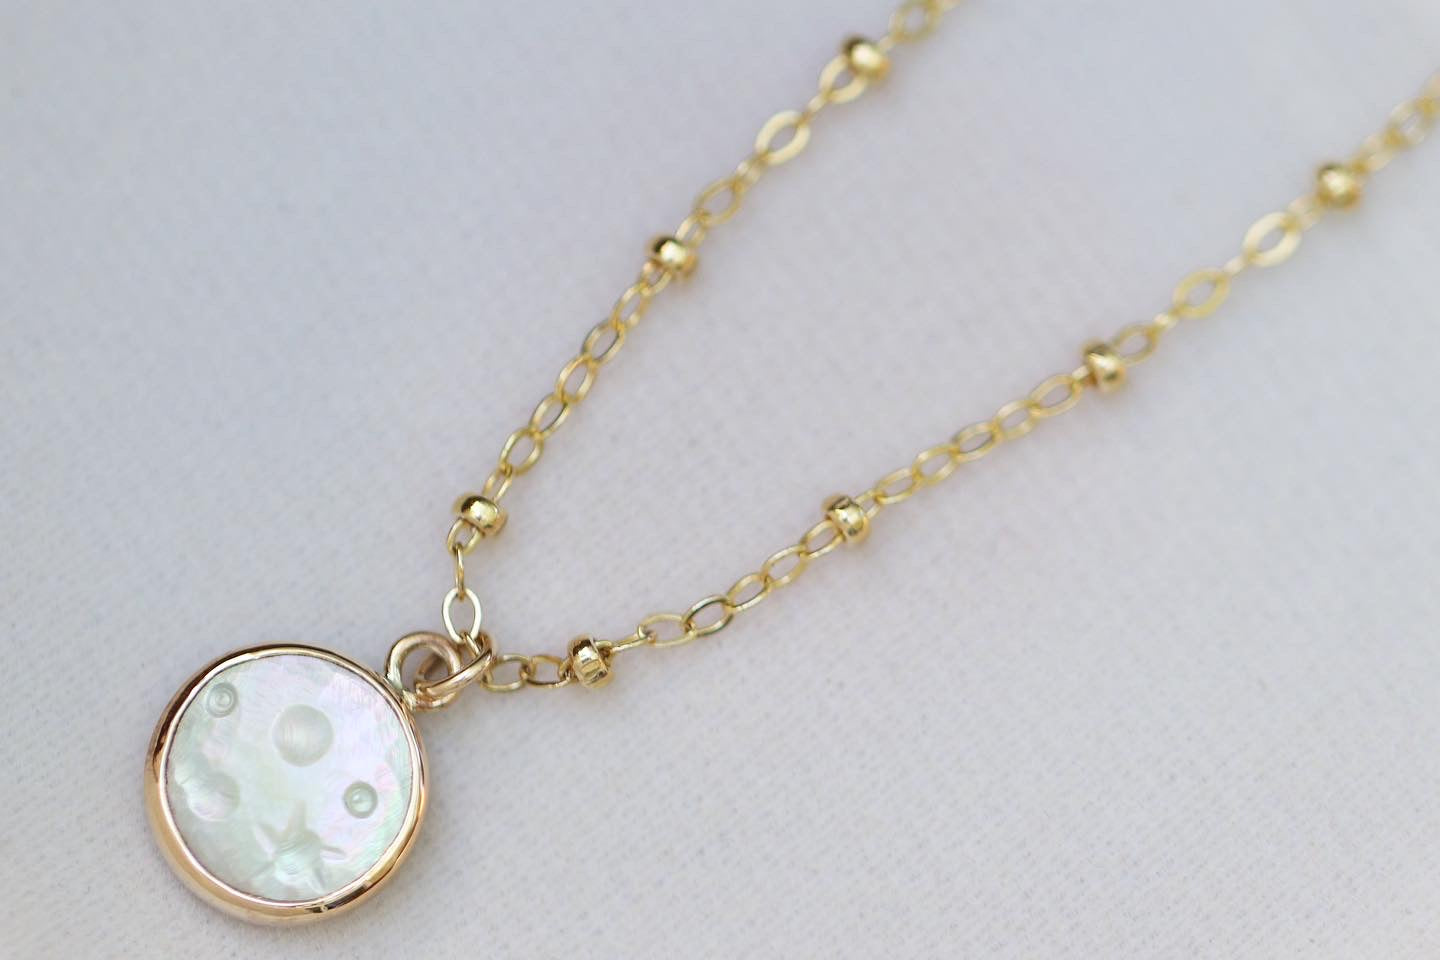 Made to order- 14k gold filled mother of pearl full moon necklace